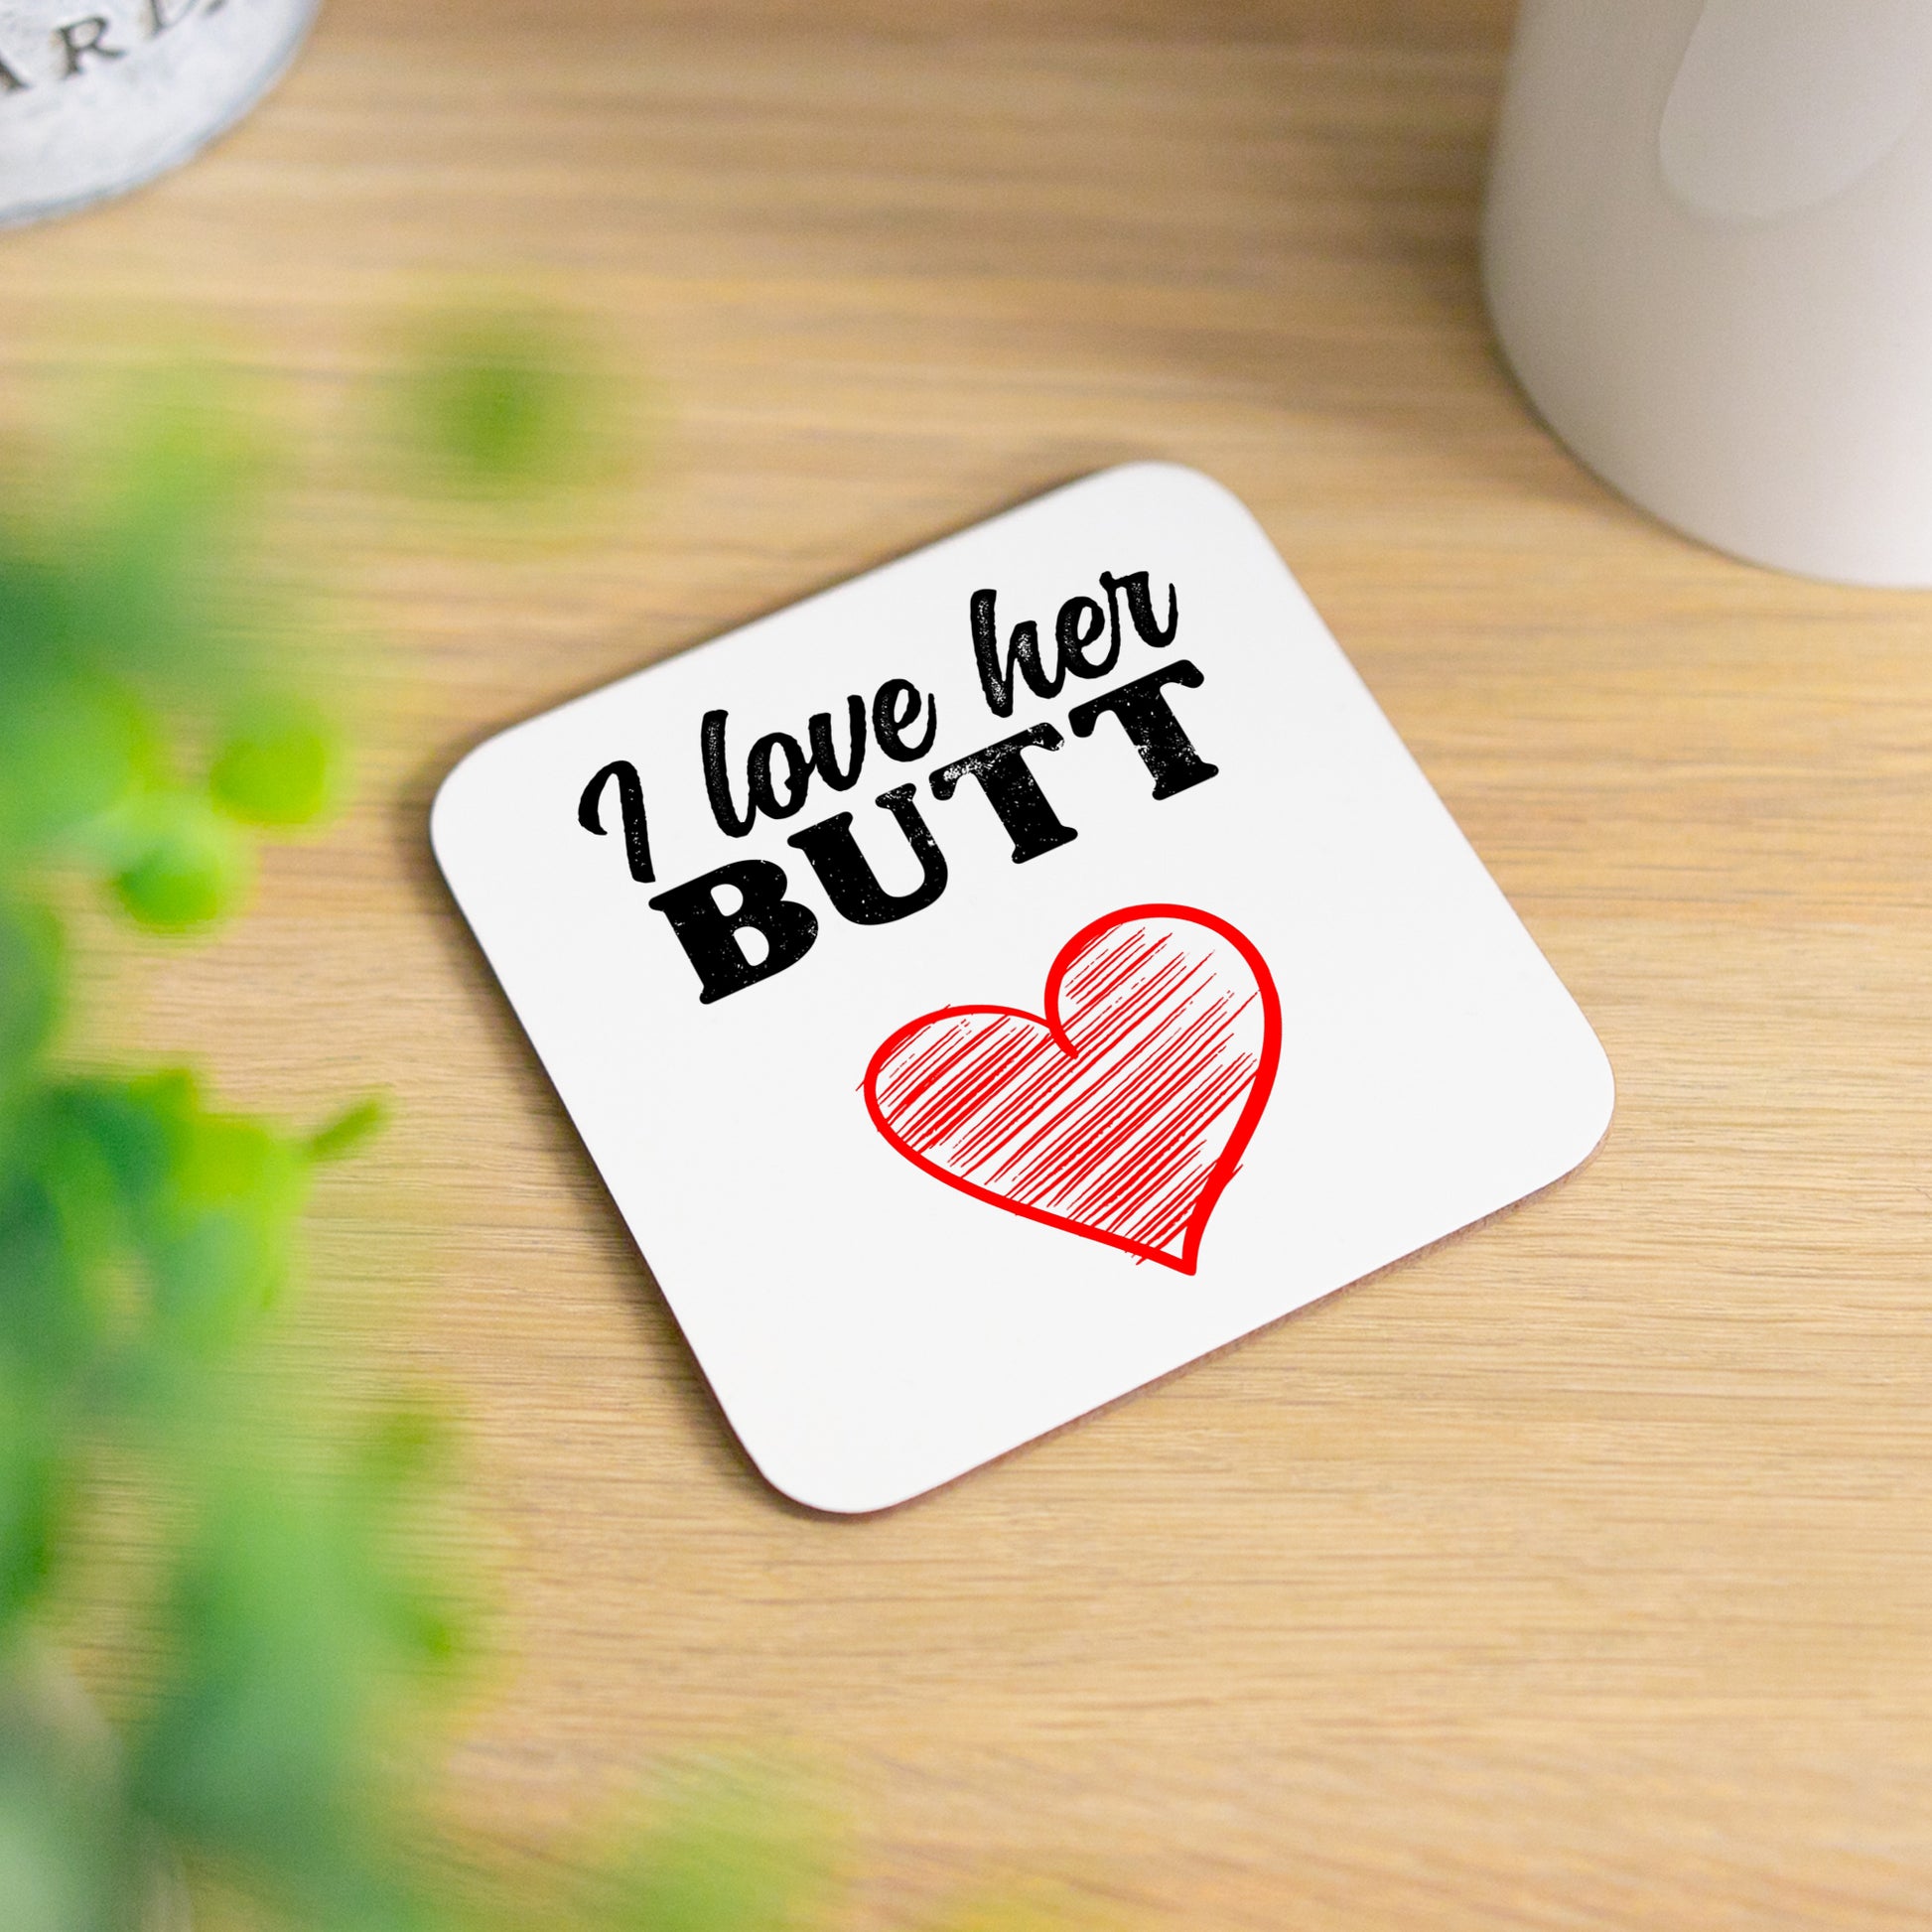 I Love His Beard / Her Butt Mug and/or Coaster Gift  - Always Looking Good - I Love Her Butt Coaster Only  